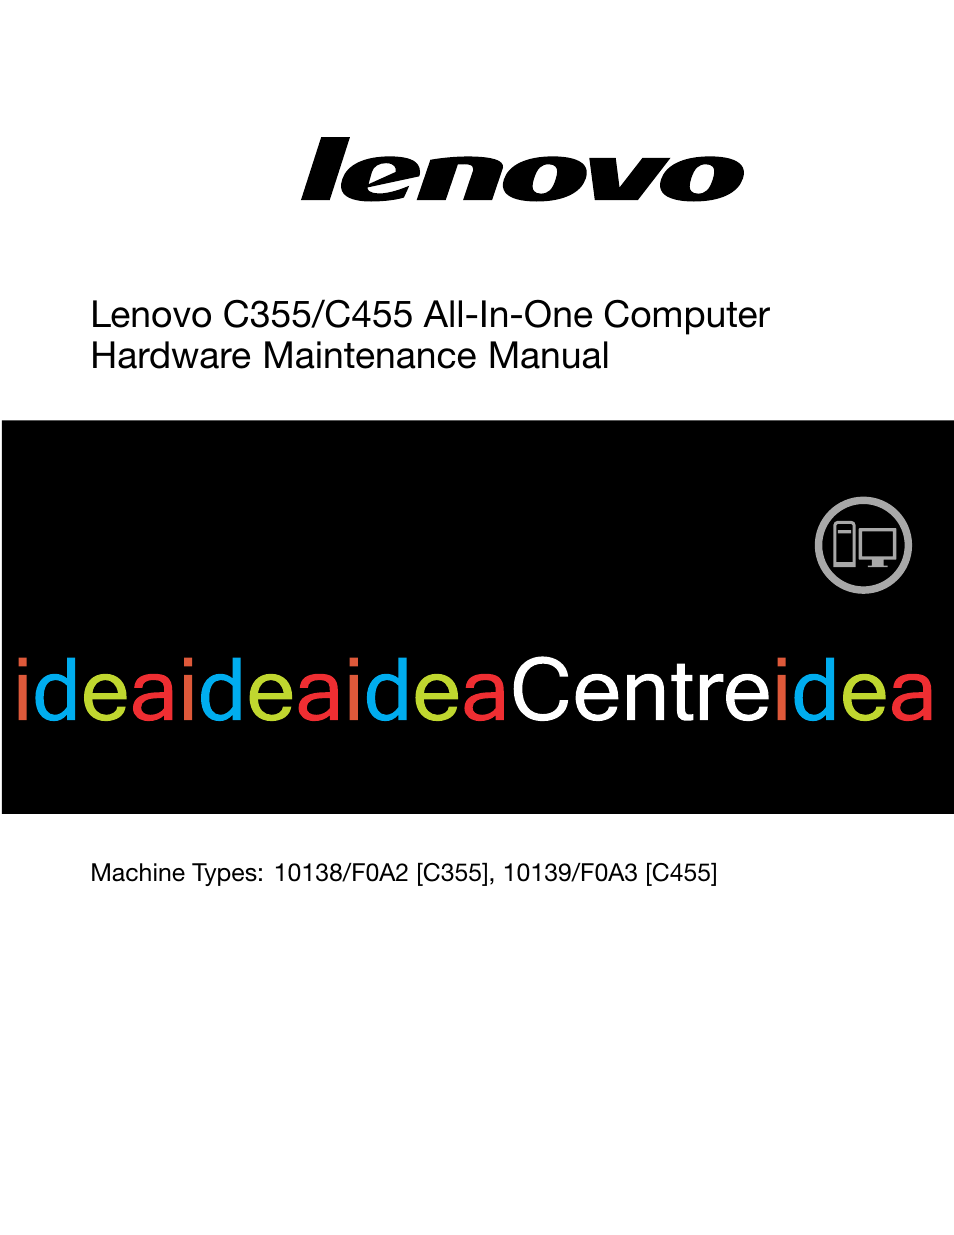 Lenovo C355 All-in-One User Manual | 83 pages | Also for: C455 All-in-One